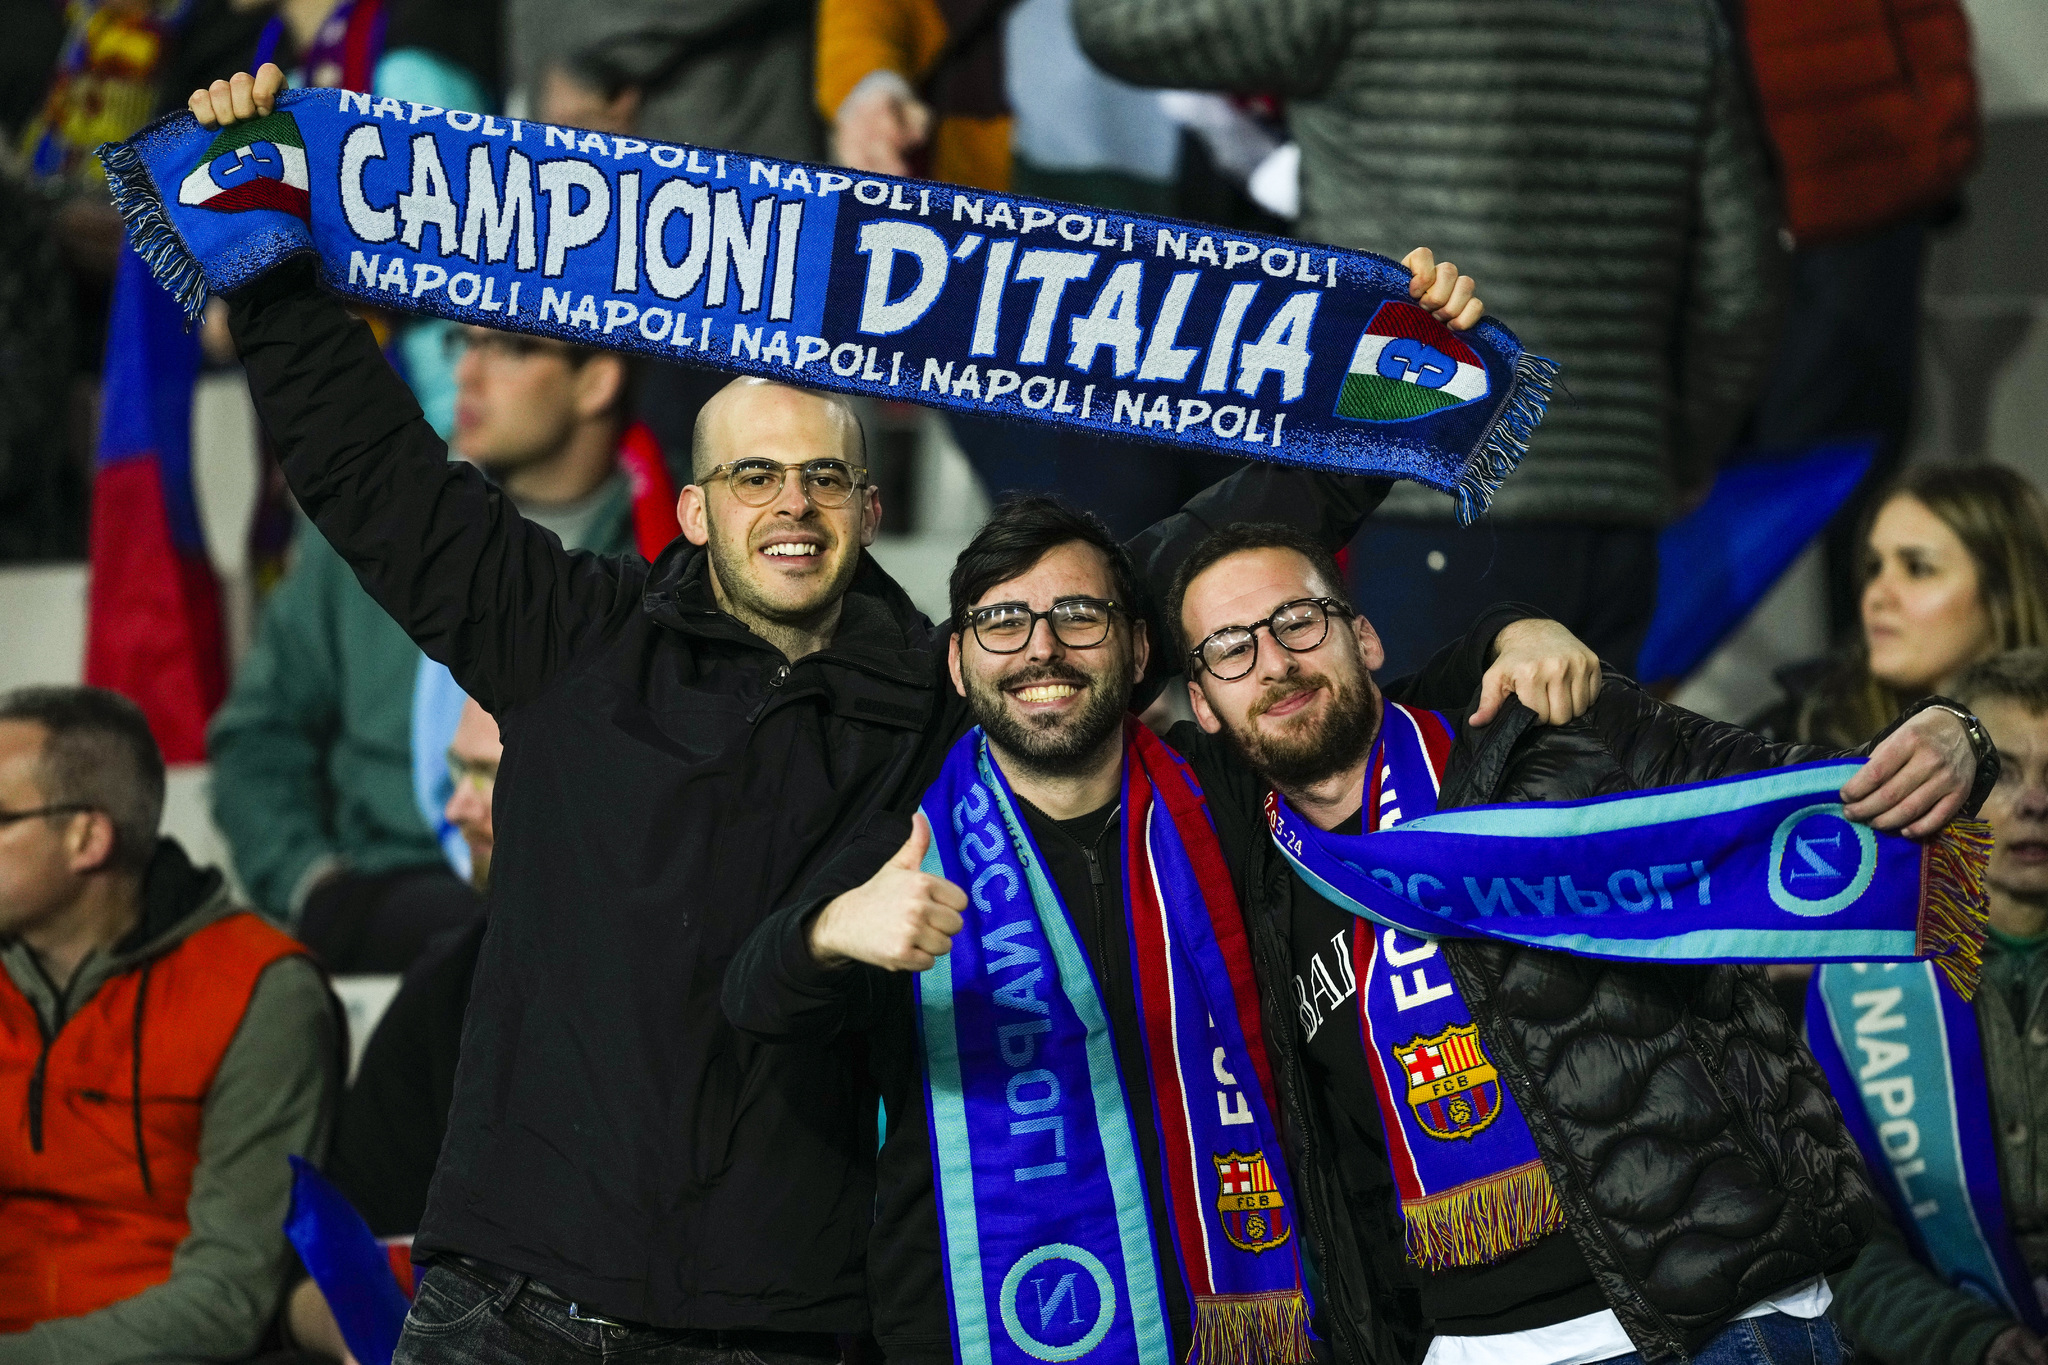 Napoli fans in attendance for tonight's match with Barcelona